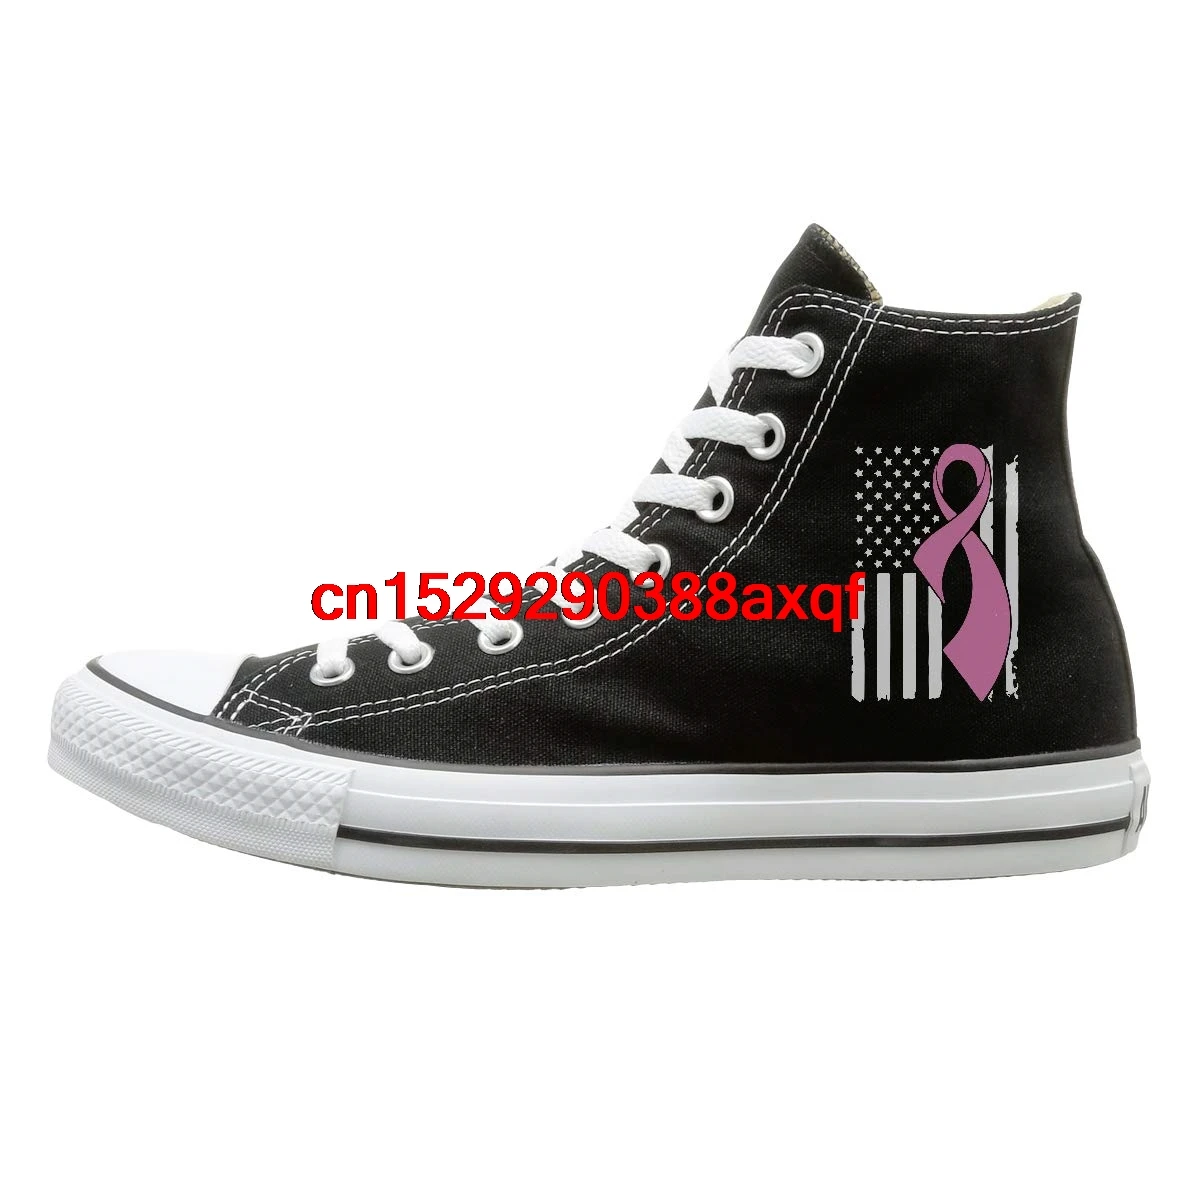 

Canvas Shoes Breast Cancer Awareness Flag-1 Casual High-Top Lace Ups Canvas Sneakers For Men's Women's